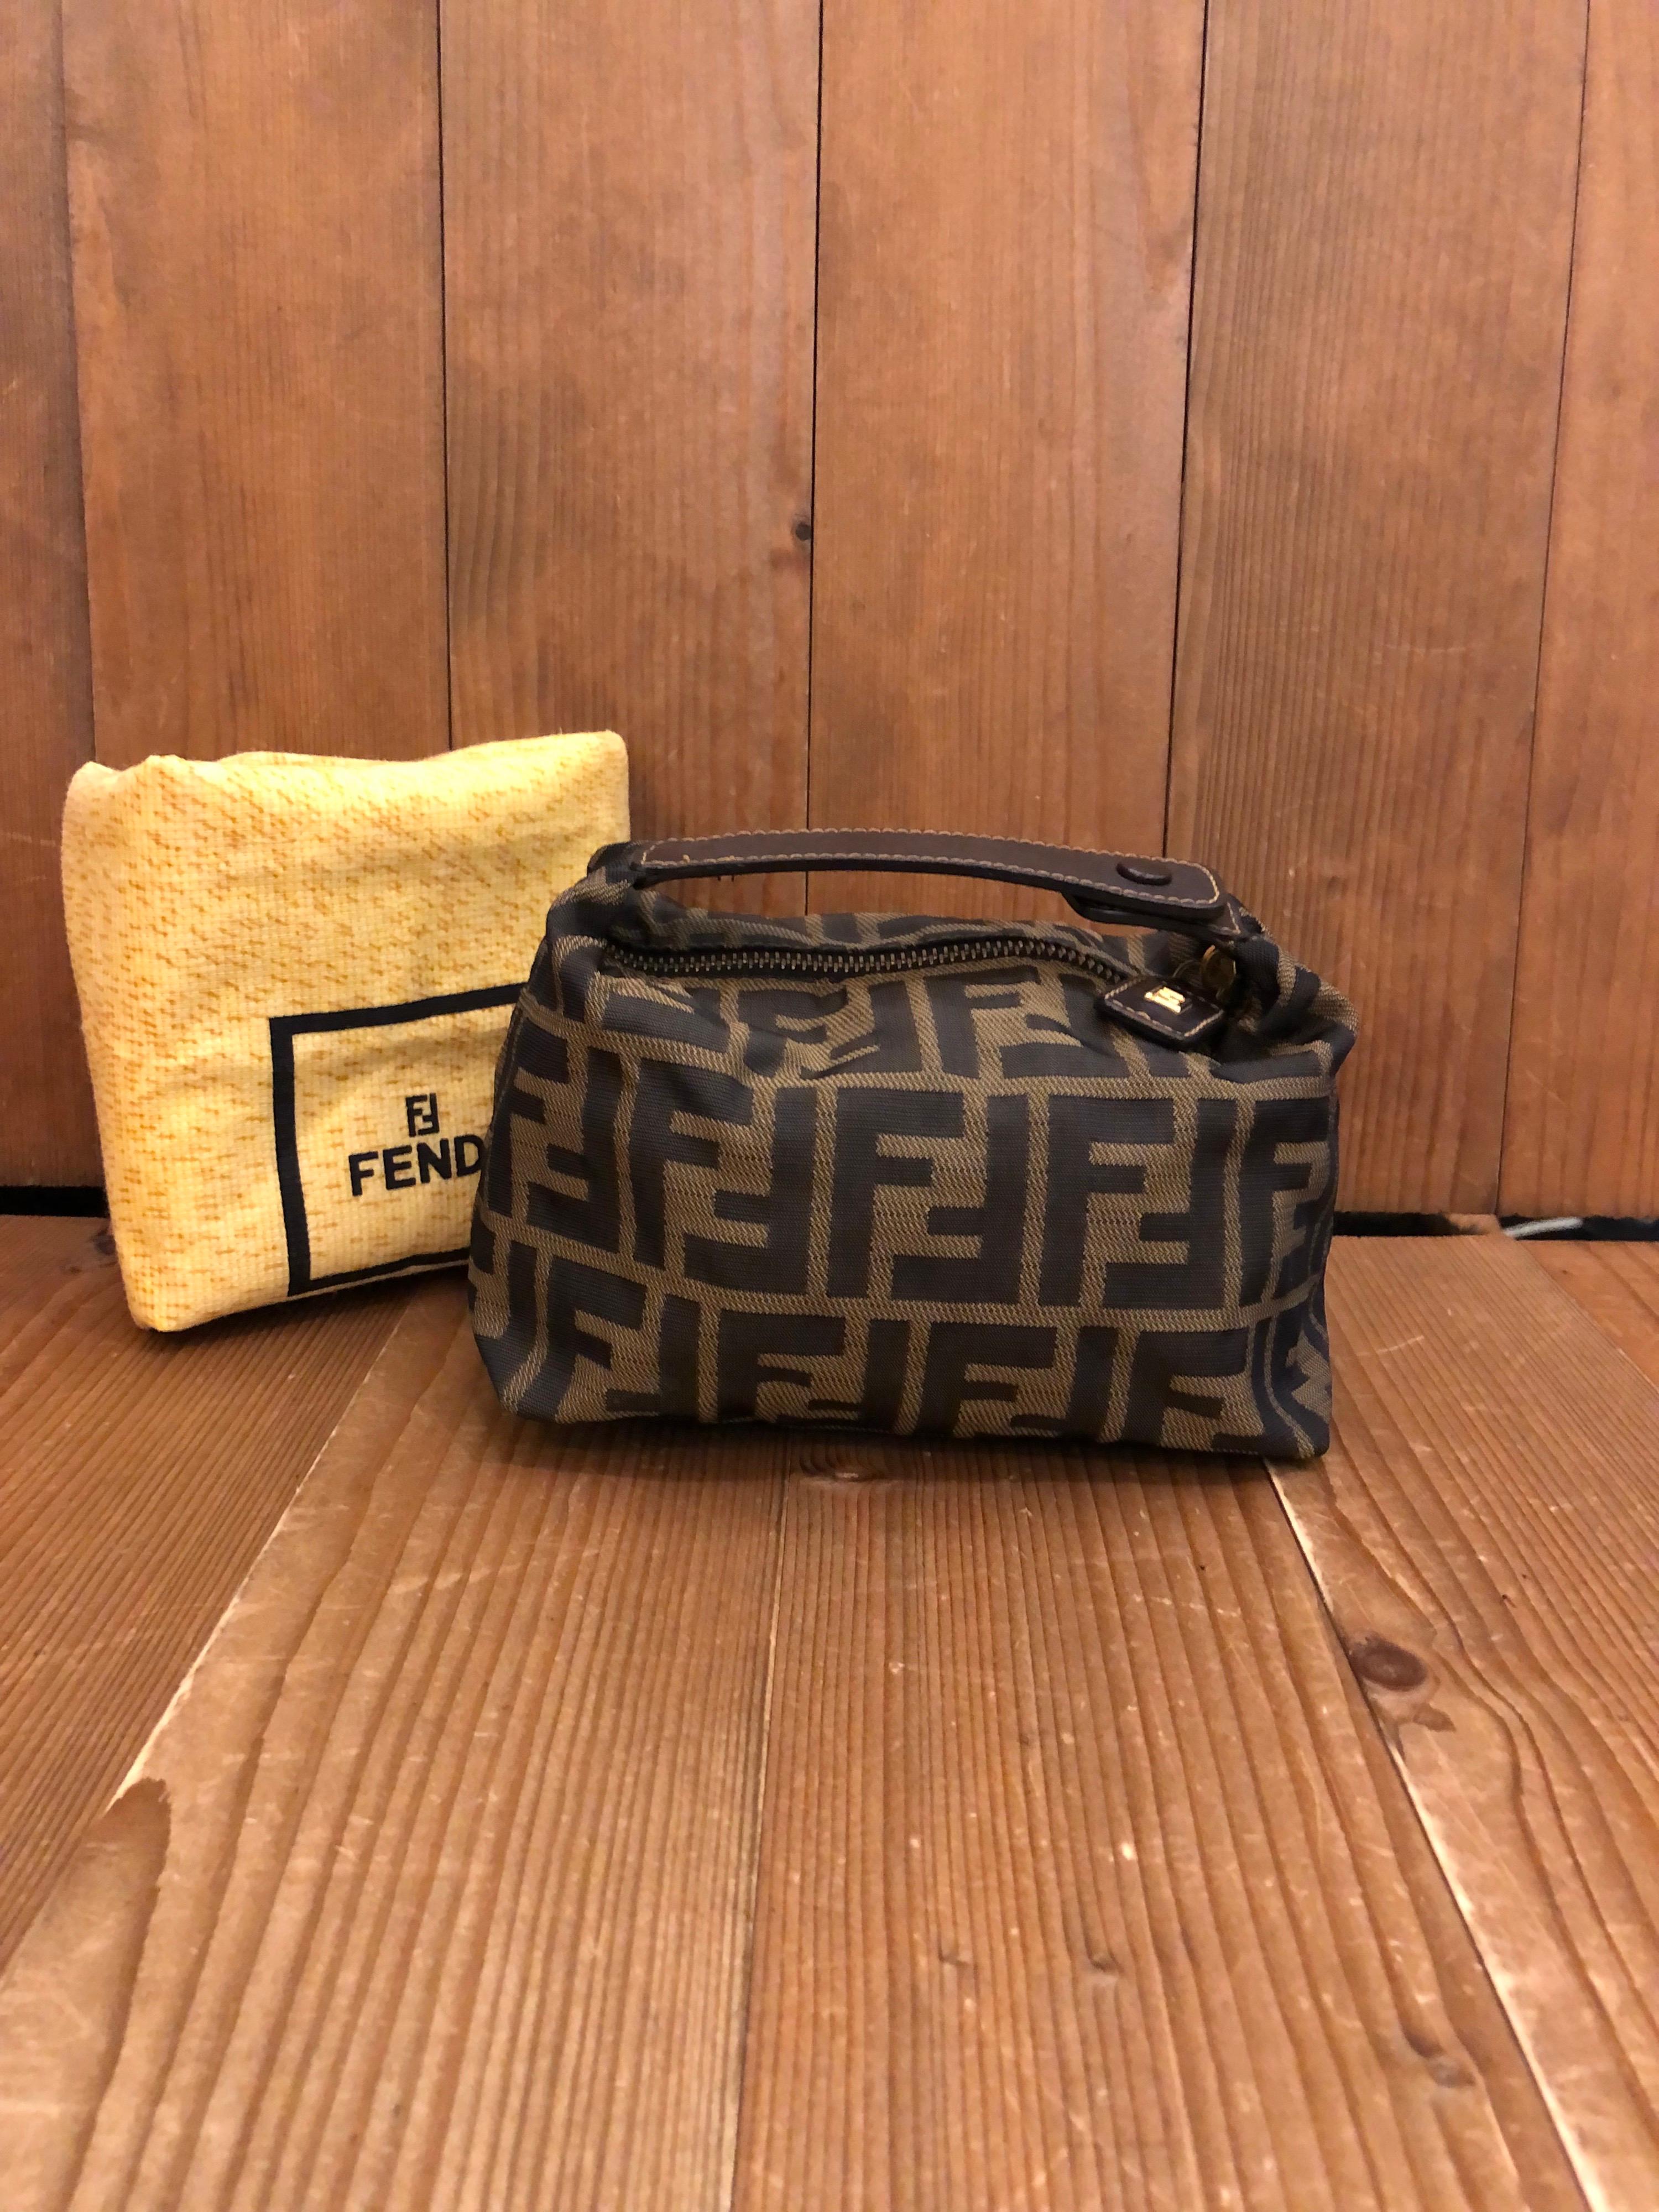 Vintage Fendi mini pouch handbag in Fendi's iconic brown Zucca jacquard. Zipper top closure. Made in Italy. Measures 6.5 x 4 x 4 inches (fits plus-sized iPhone). Comes with dustbag.

Condition: Minor signs of wear. Generally in very good condition